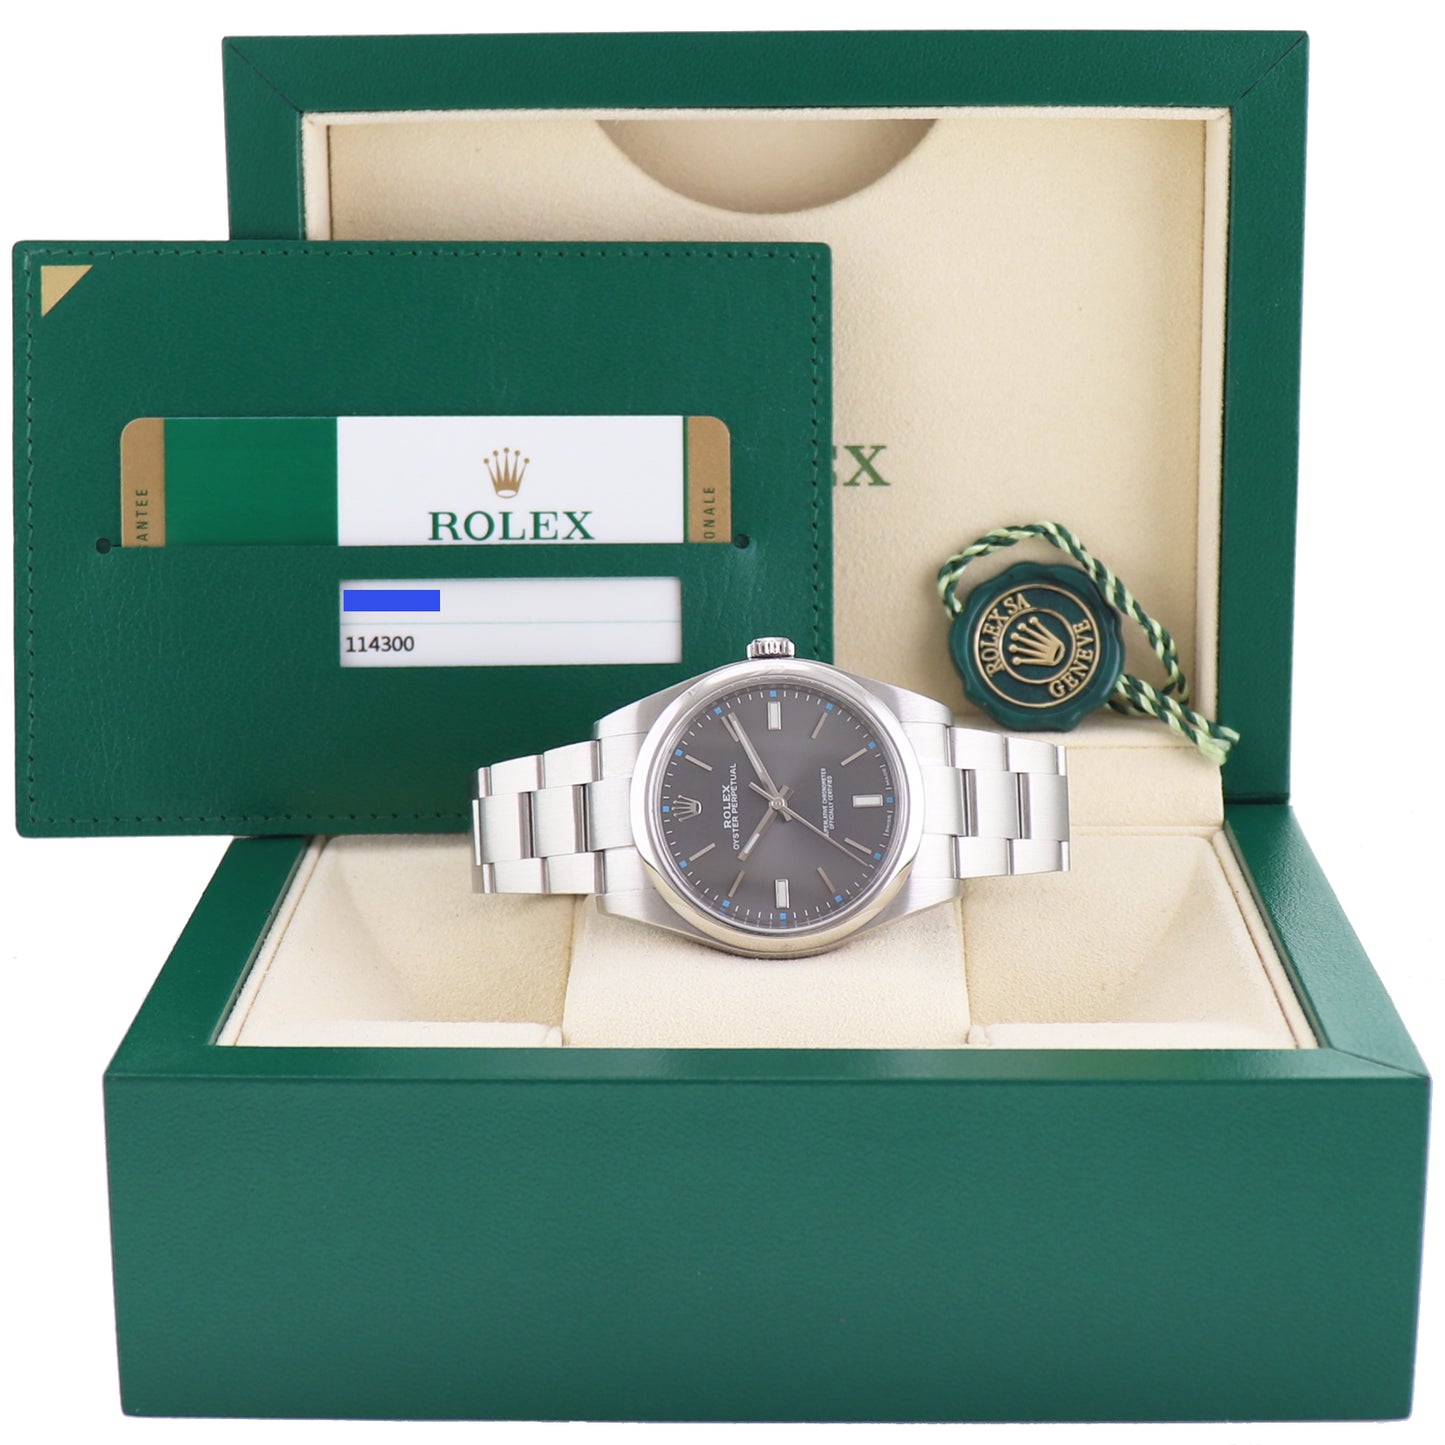 PAPES 2017 MINT Rolex Oyster Perpetual 41mm Rhodium Grey Oyster Watch 114300